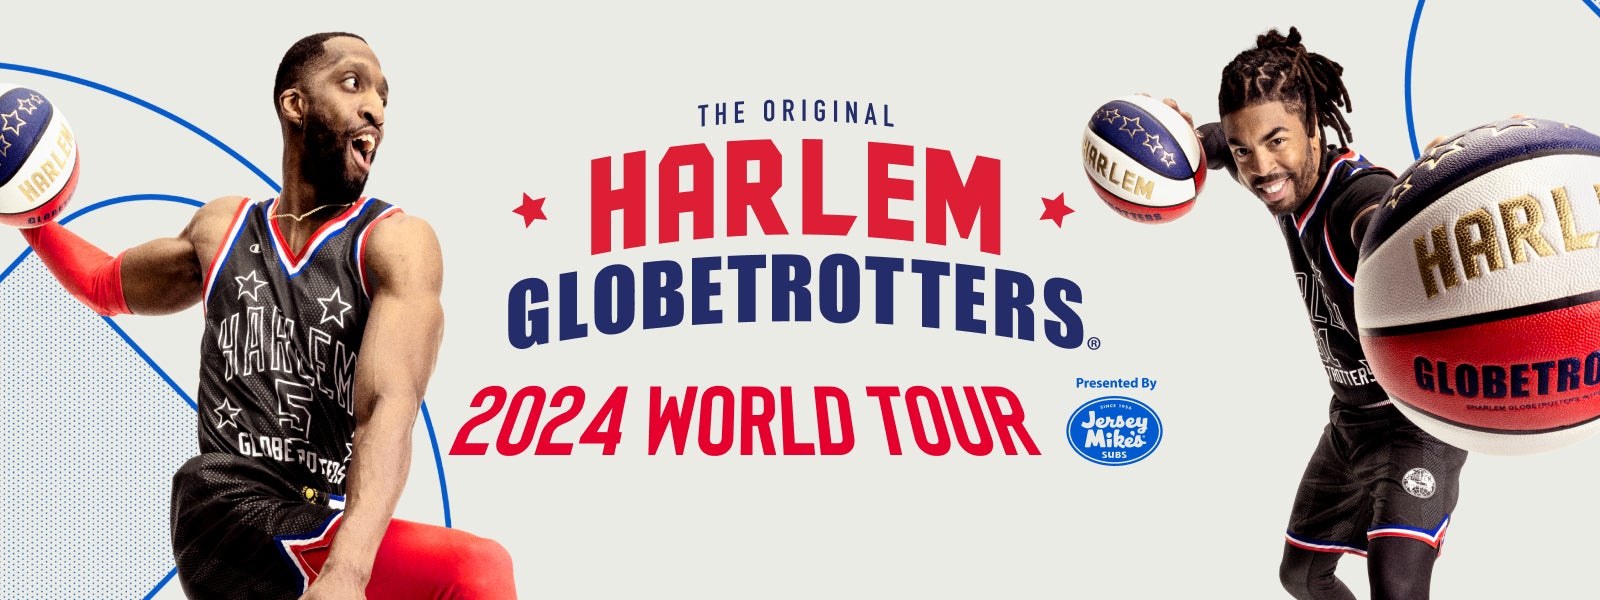 Harlem Globetrotters return to the court with basketball hijinks